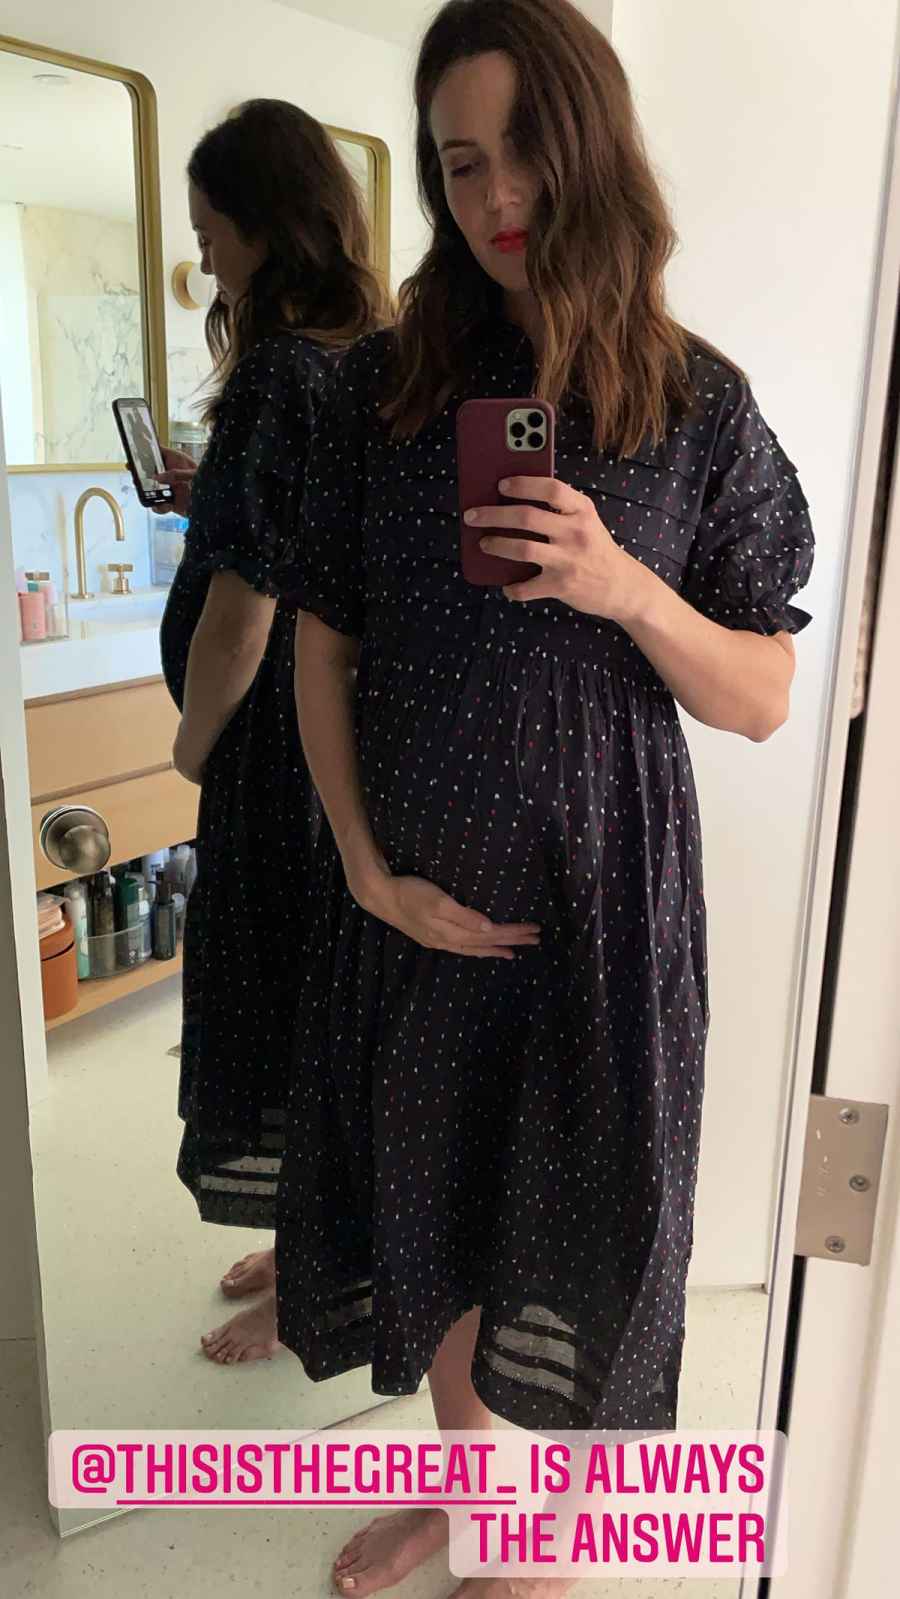 Mandy Moore’s Baby Bump Album Ahead of 1st Child: See Her Pregnancy Pics